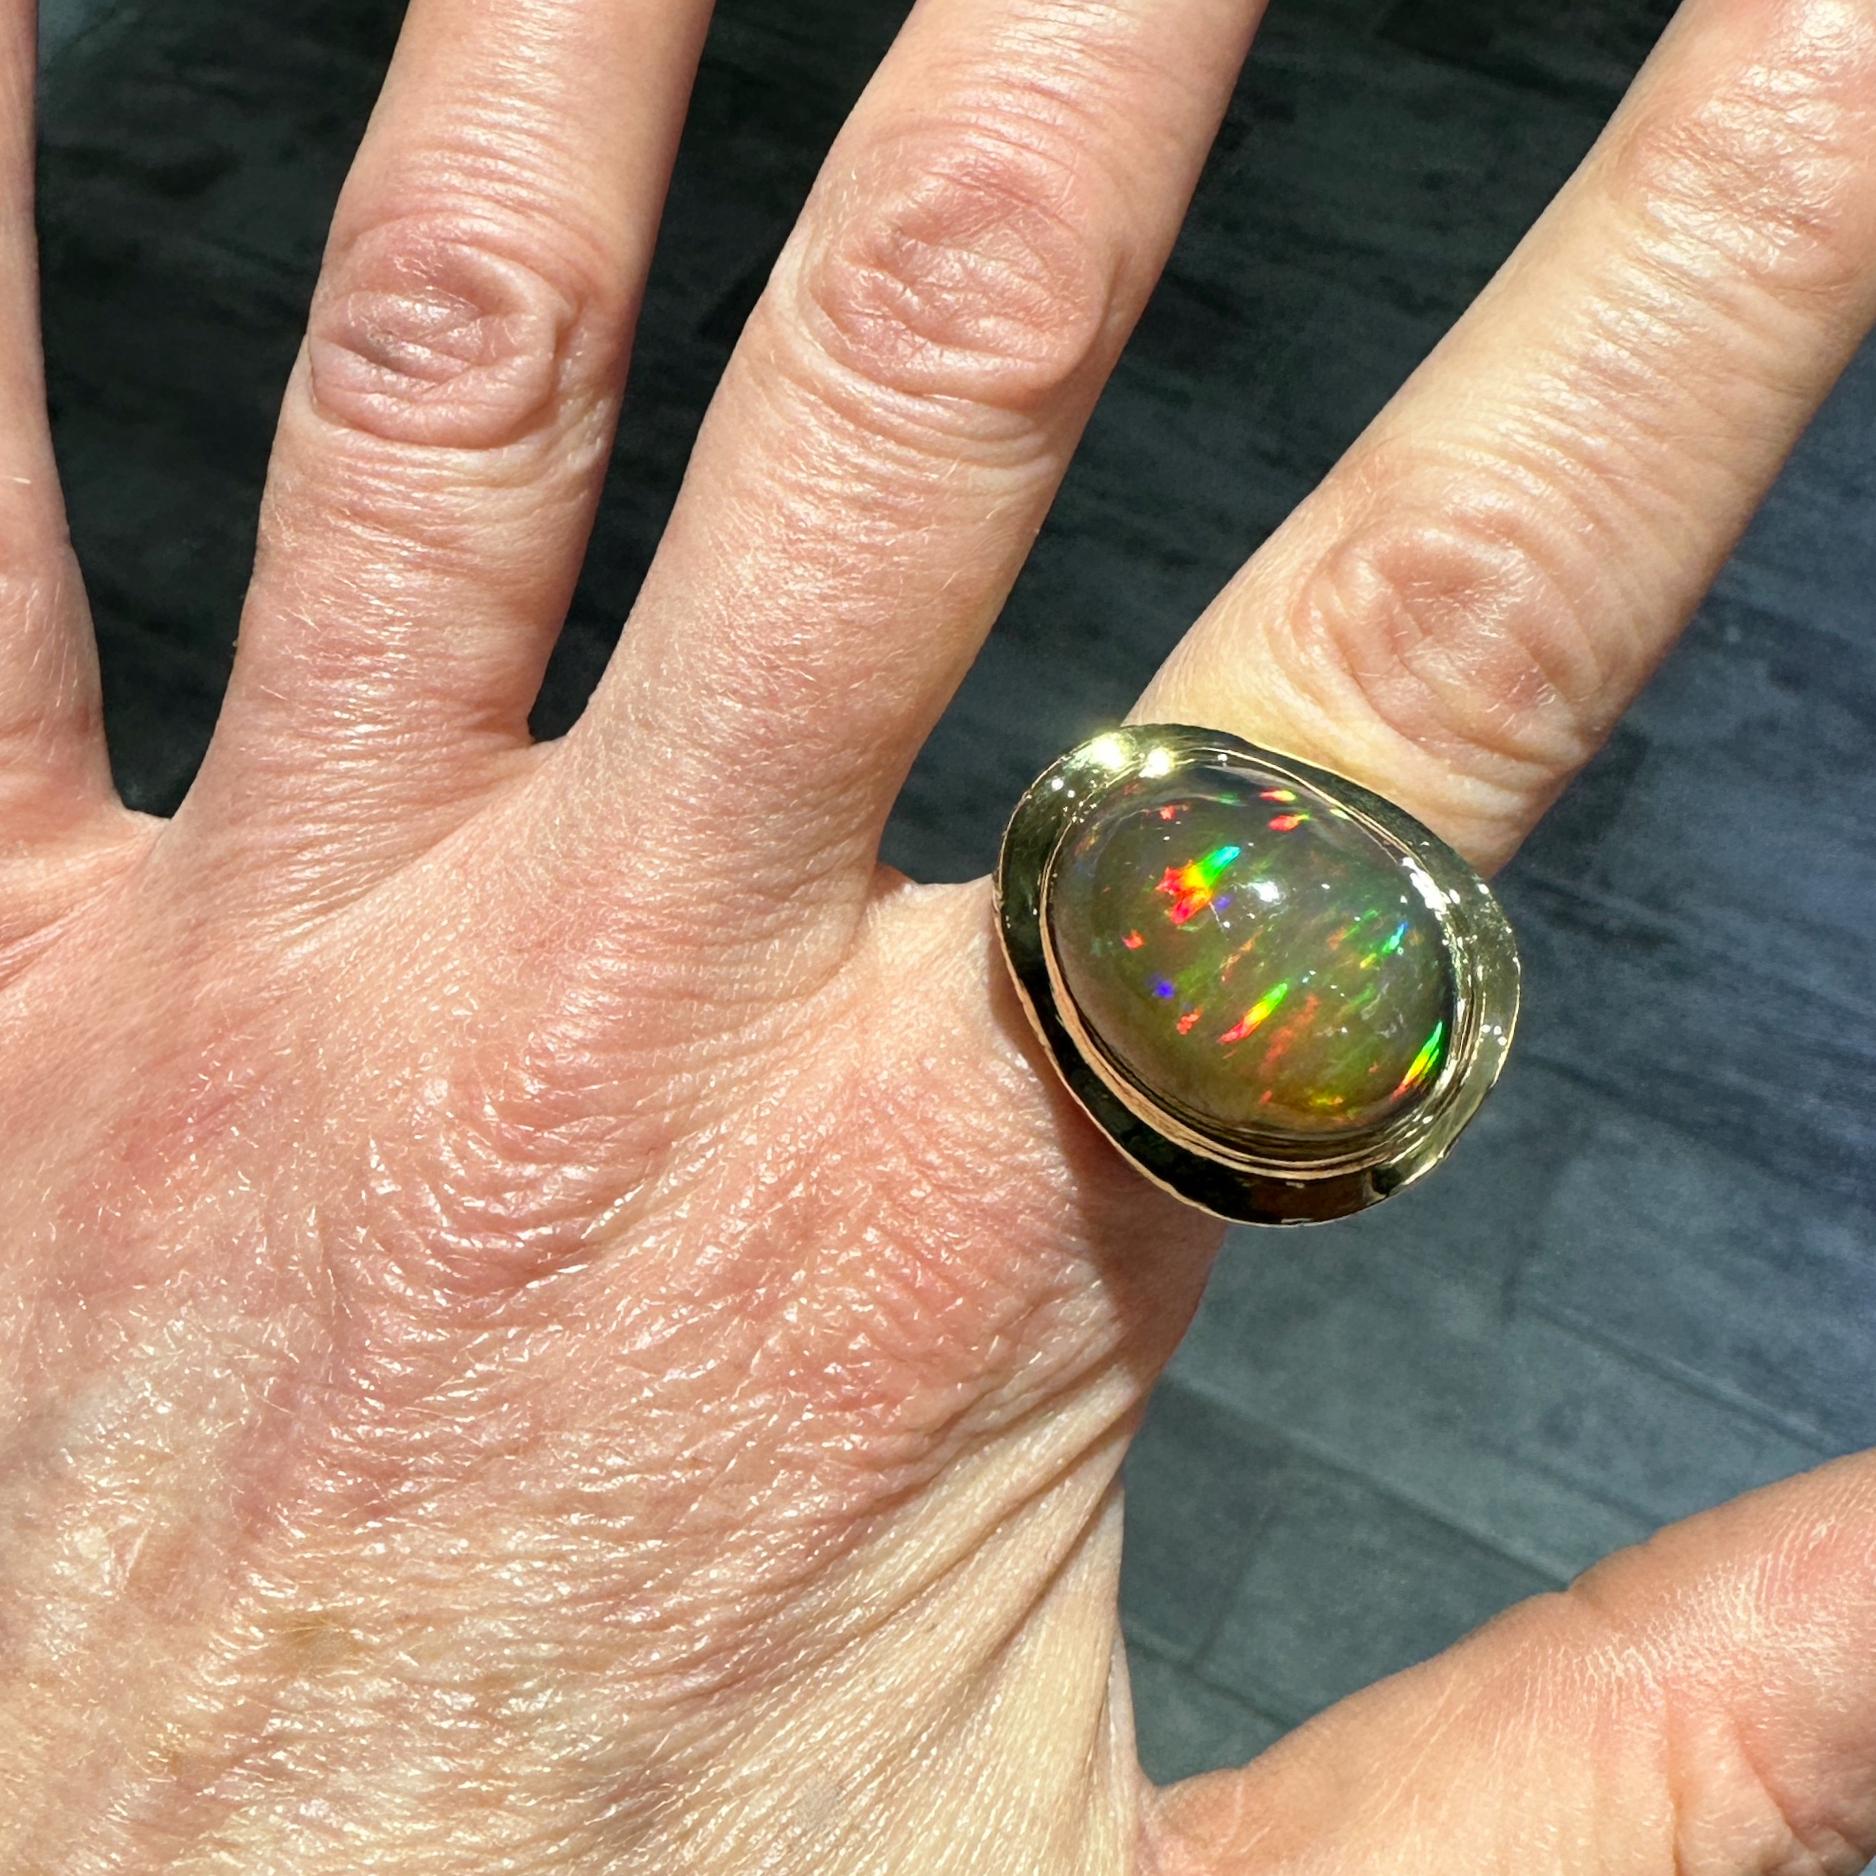 This new, one-of-a-kind ring by Eytan Brandes features a spectacular, high-domed Ethiopian opal with moody brown body color and a veritable firestorm of internal colors -- orangy-red, green and yellow predominate but there's even an overall